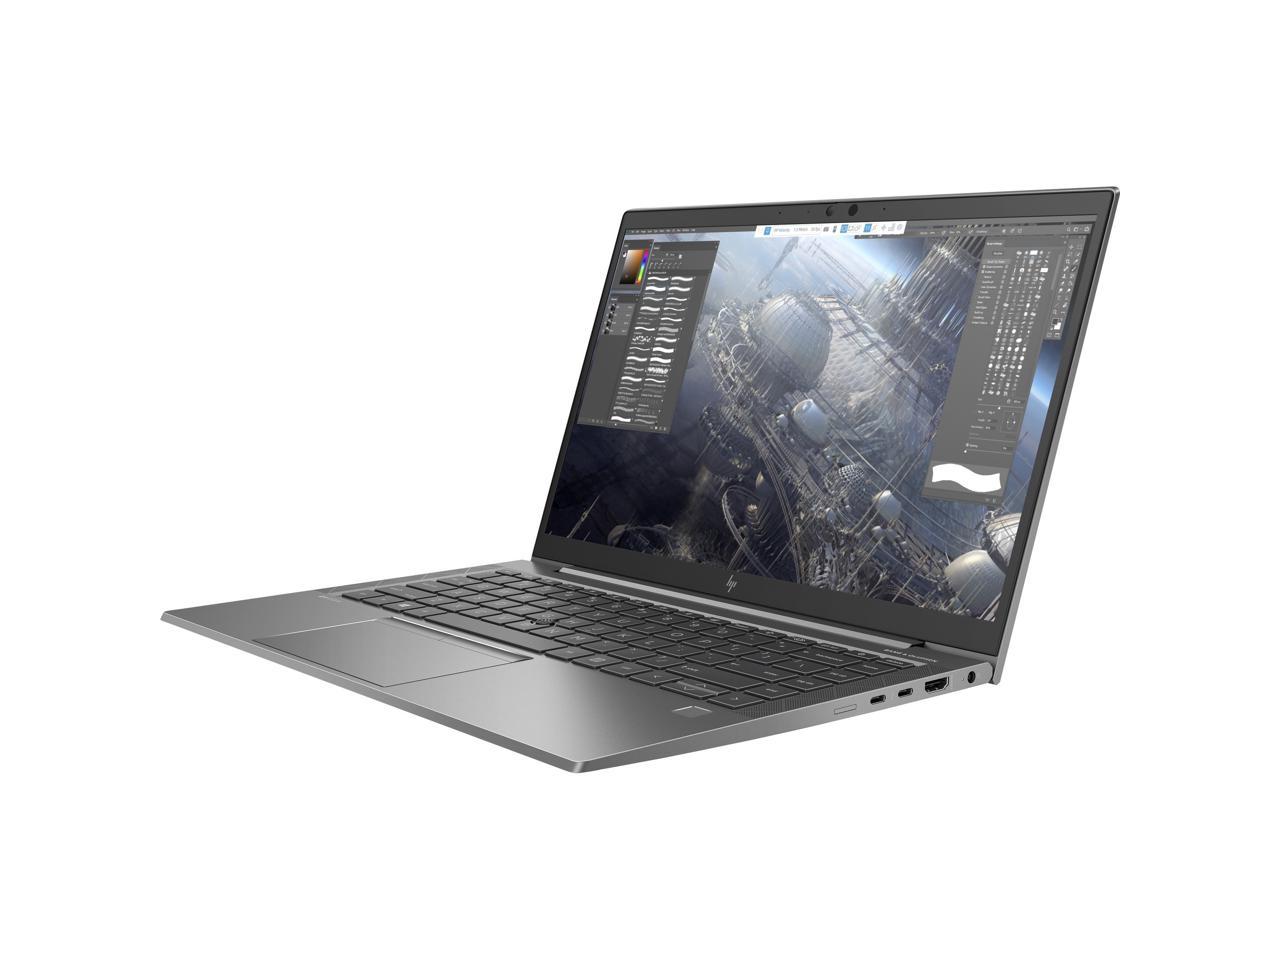 HP ZBook Firefly 14 G7 14" Mobile Workstation - Intel Core i7 (10th Gen) i7-10610U Quad-core (4 Core) 1.80 GHz - 16 GB RAM - 512 GB SSD - Windows 10 Pro - NVIDIA Quadro P520 with 4 GB, Intel UHD